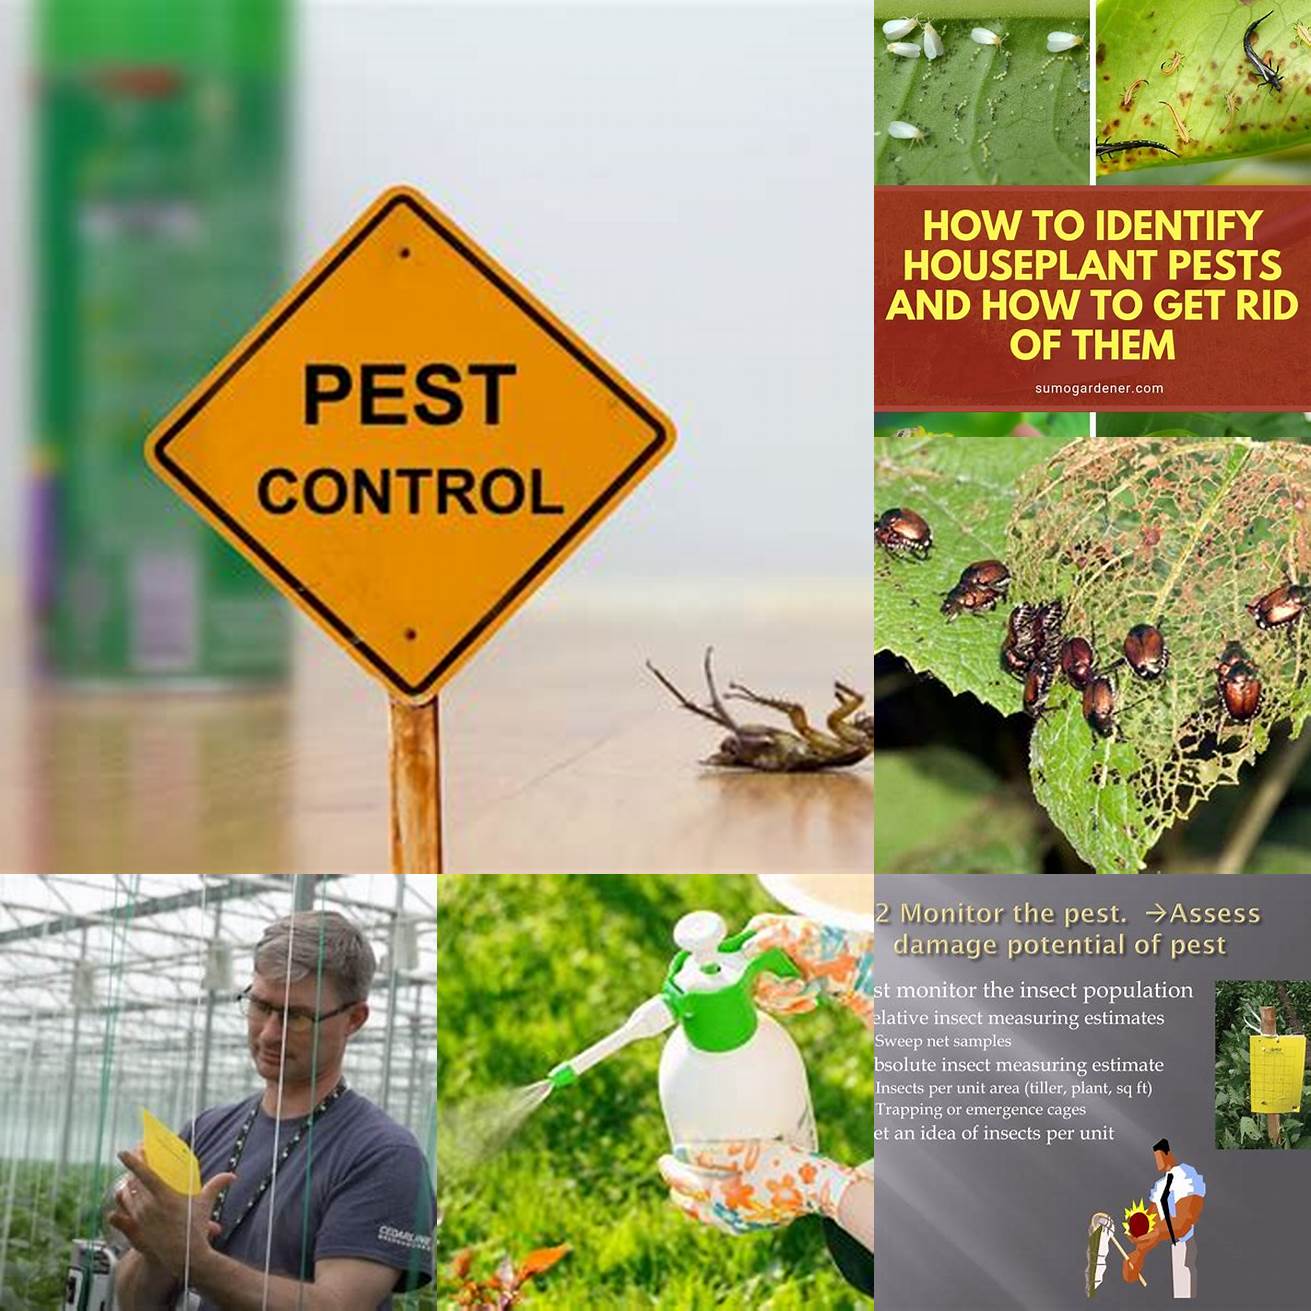 4 Pest control Monitor your plants for signs of pests or disease and take action immediately if you notice any issues